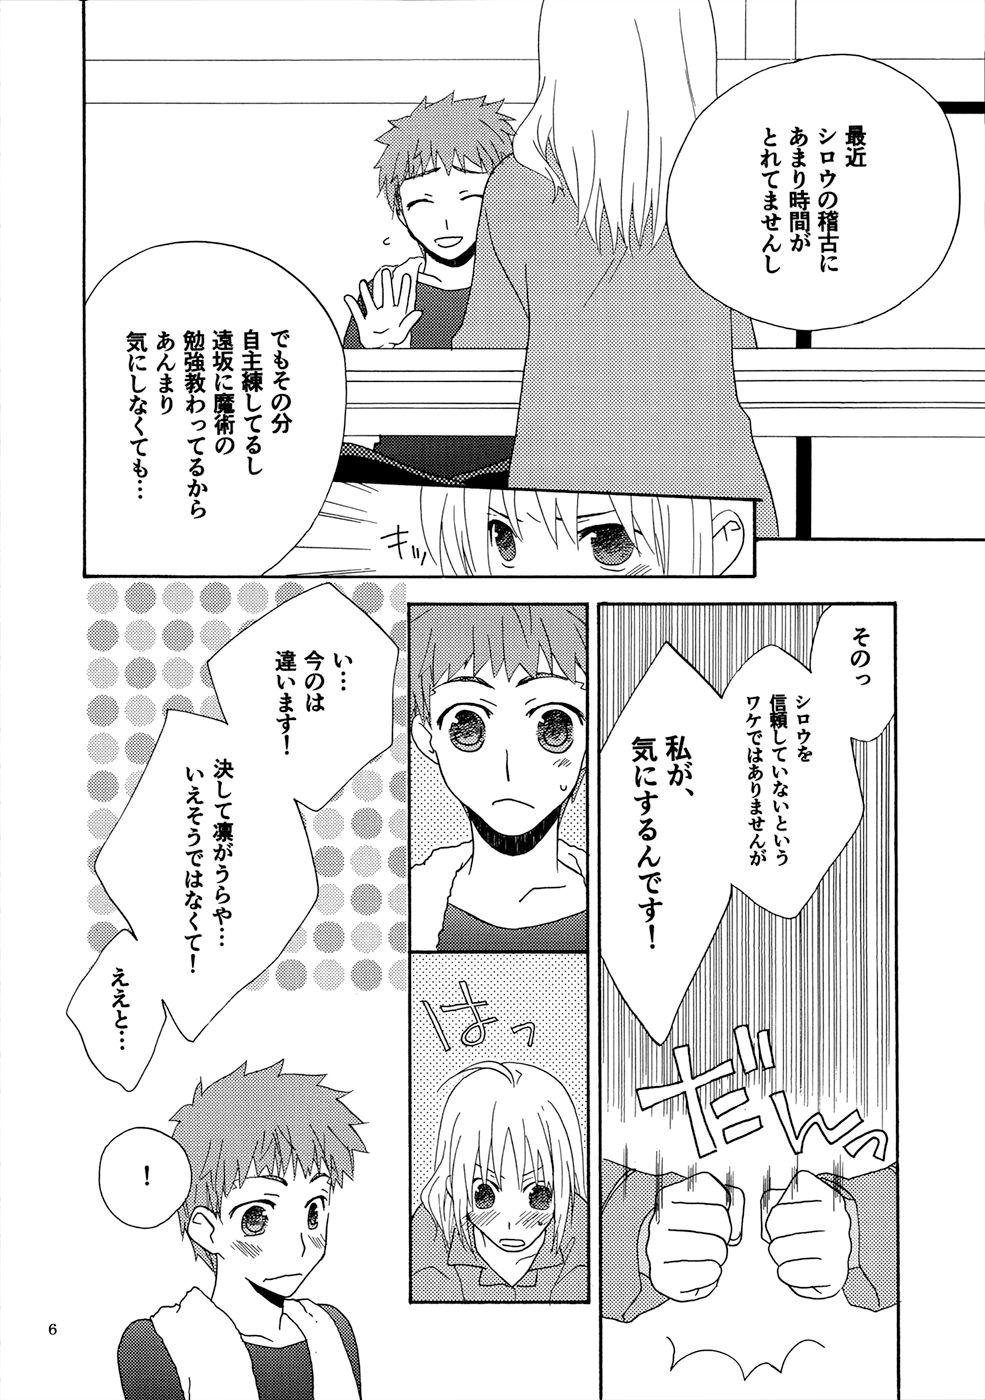 Secret POP STAR - Fate stay night Monster Dick - Page 5